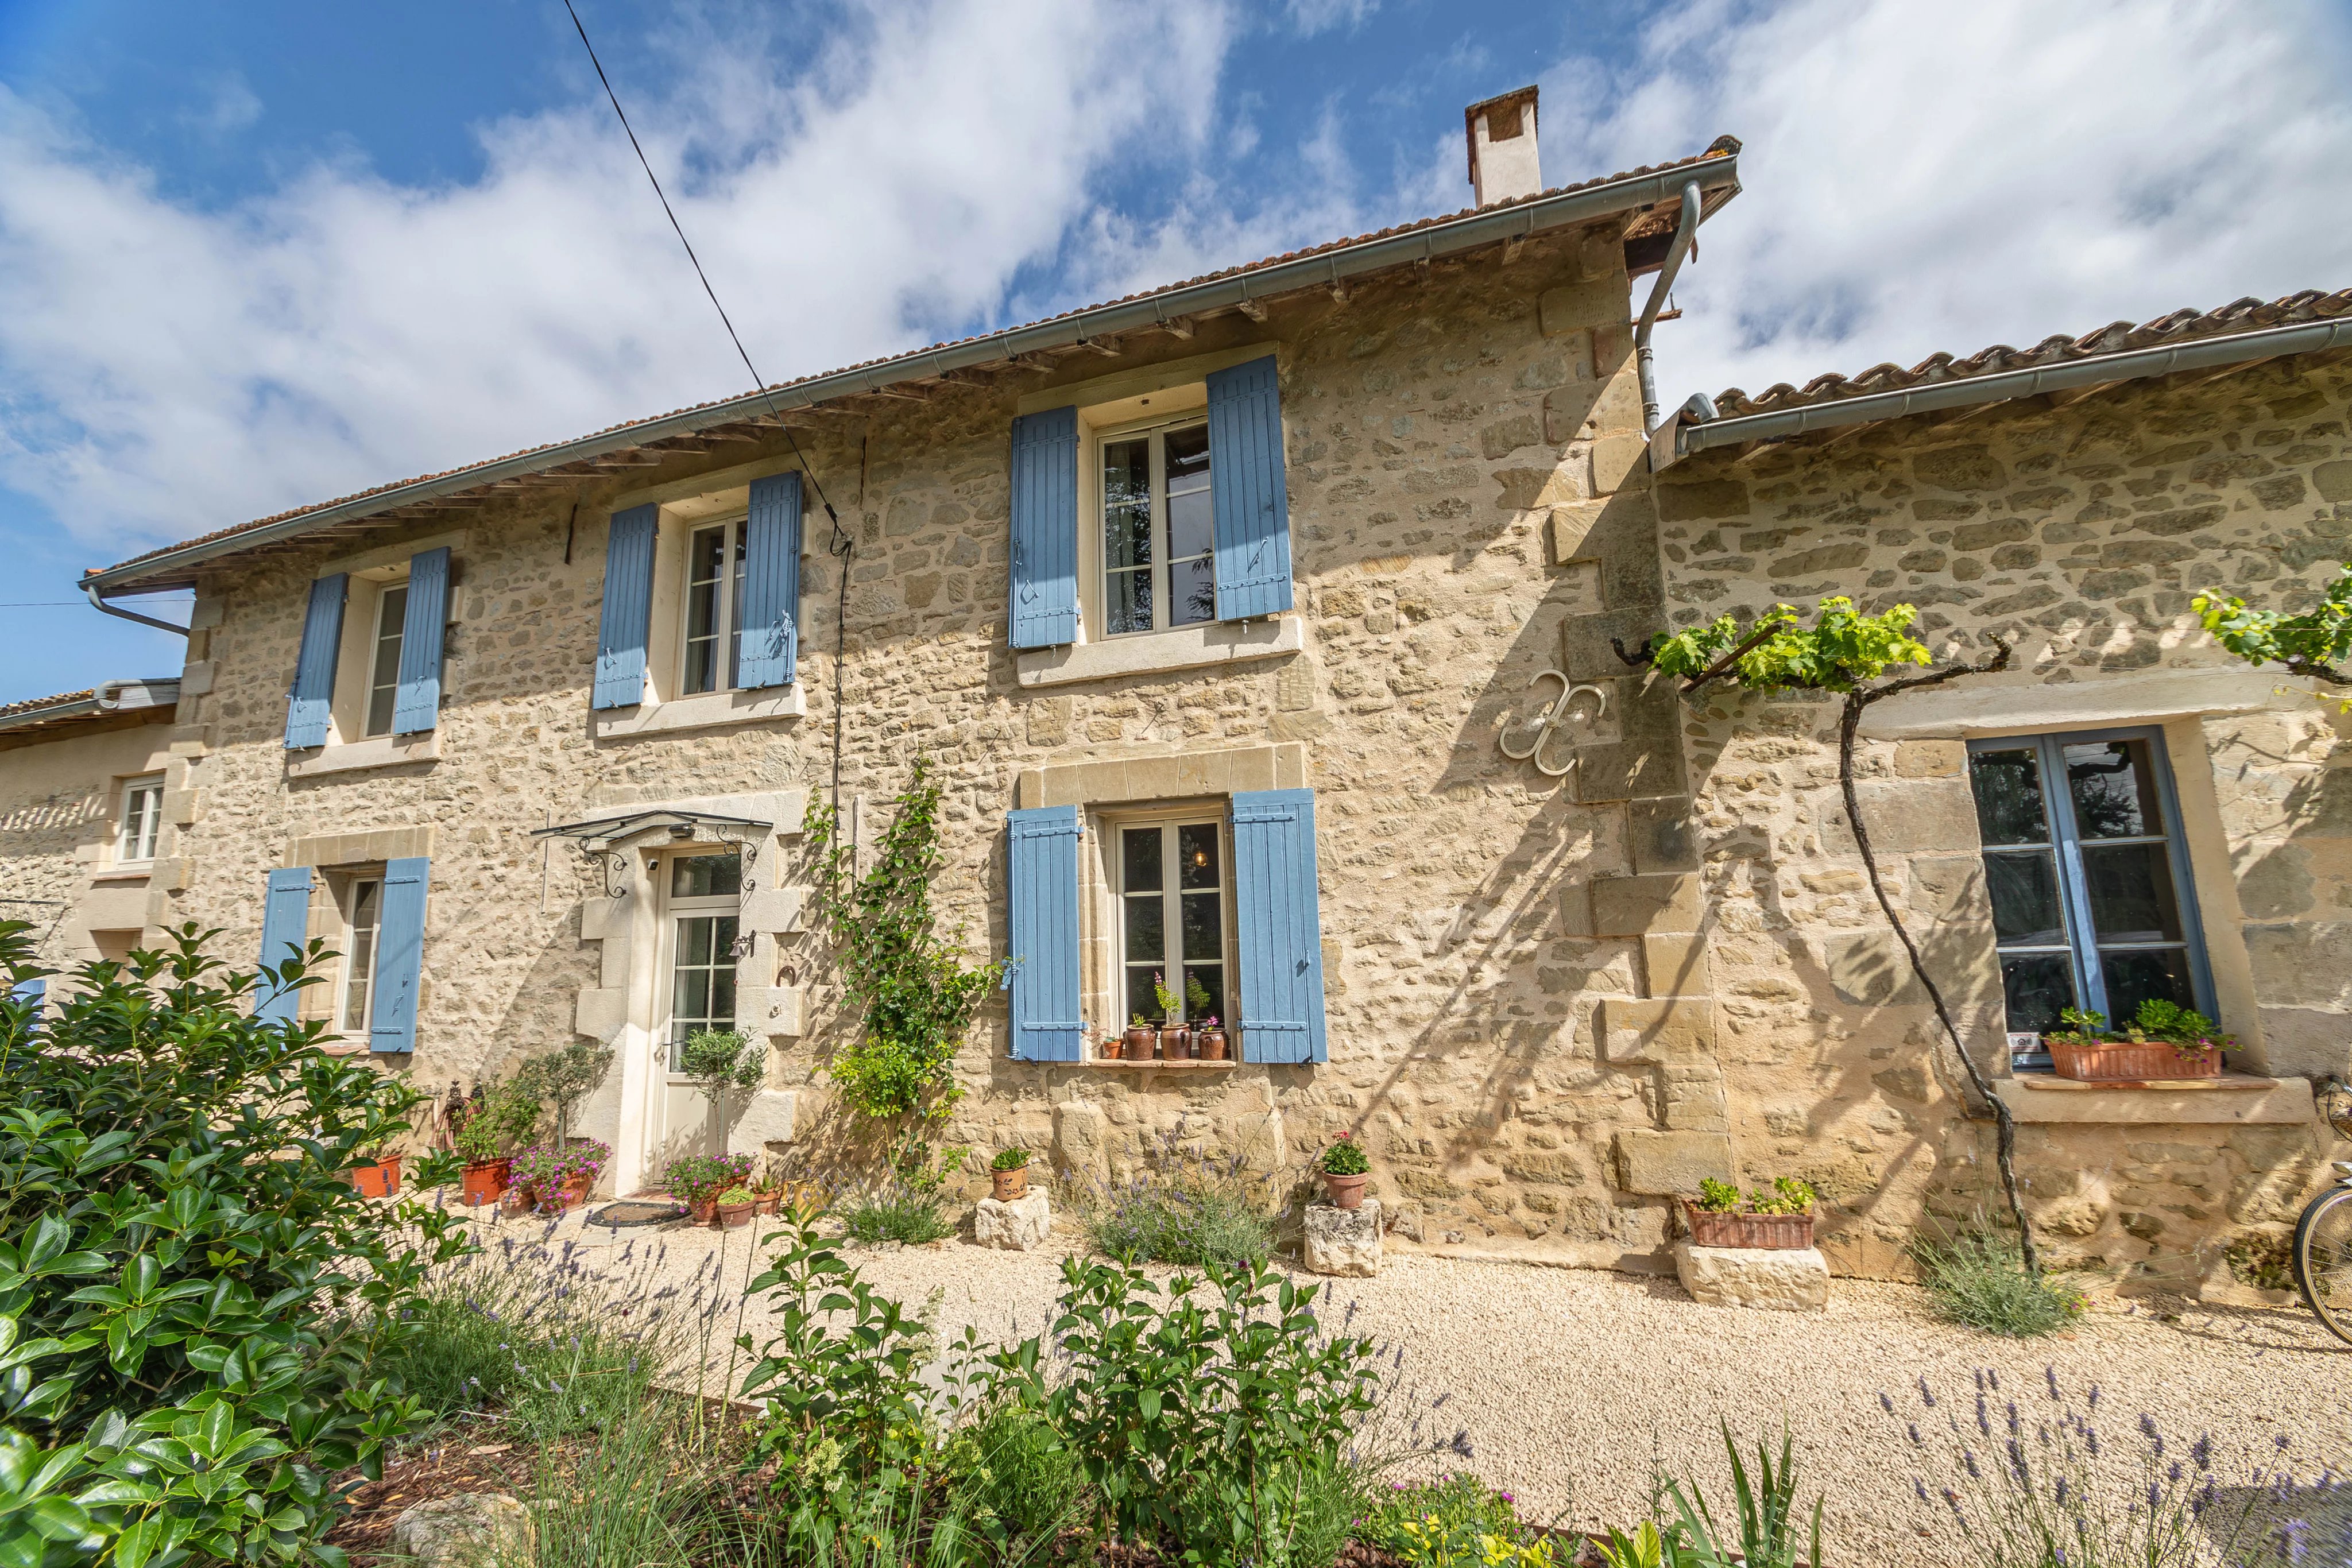 Beautifully renovated stone house with 6 bedrooms, 4 bathrooms, pool and woodland